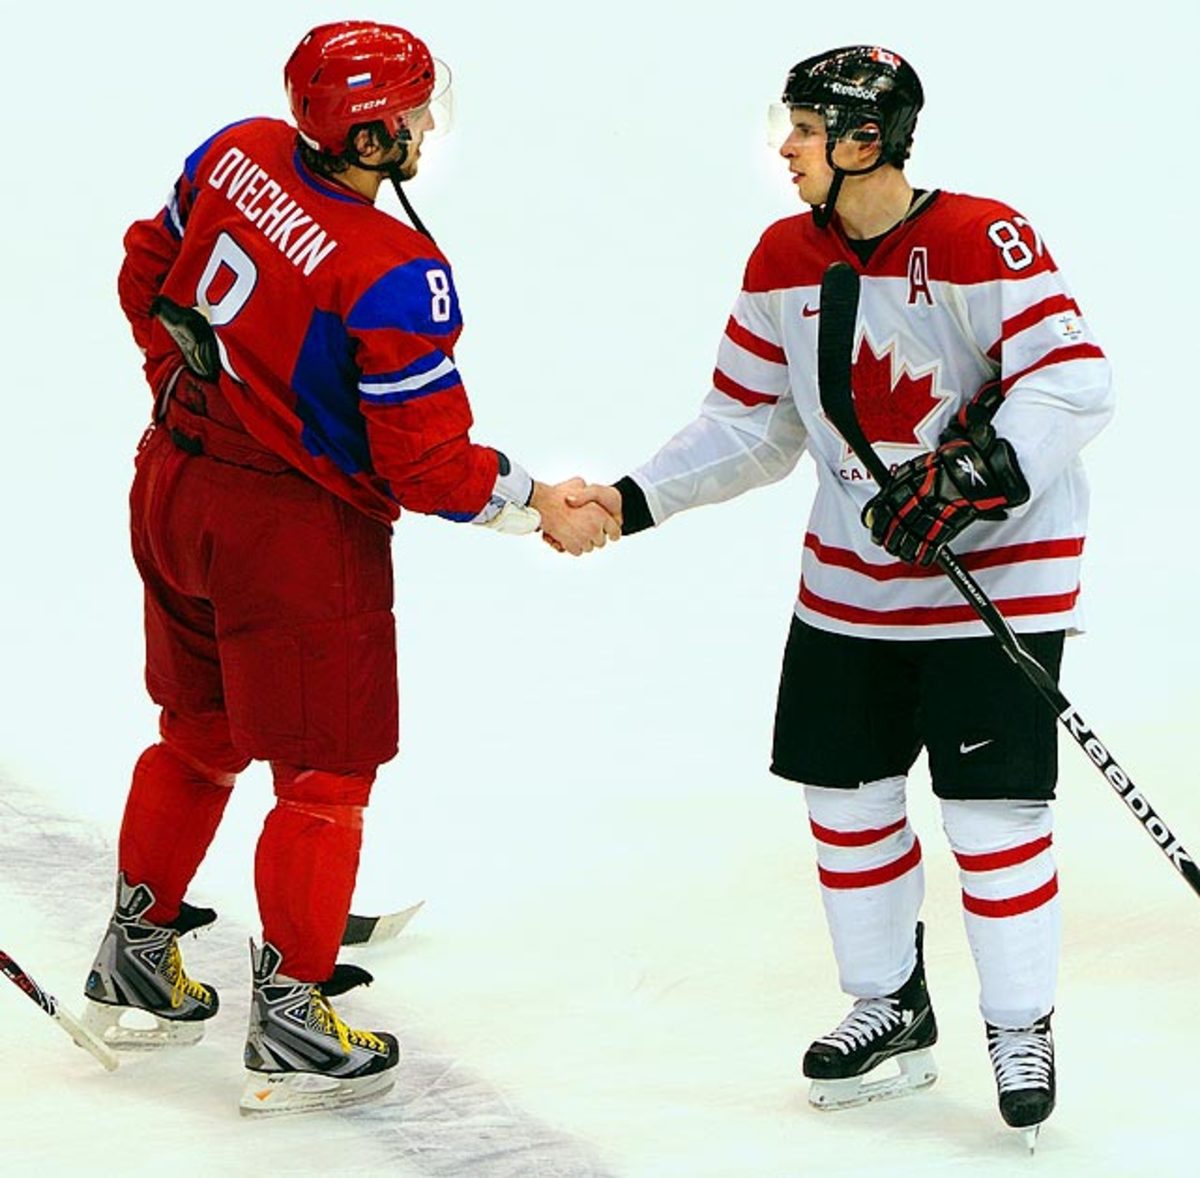 10 years of Crosby and Ovechkin: Bad bounces derailed the rivalry